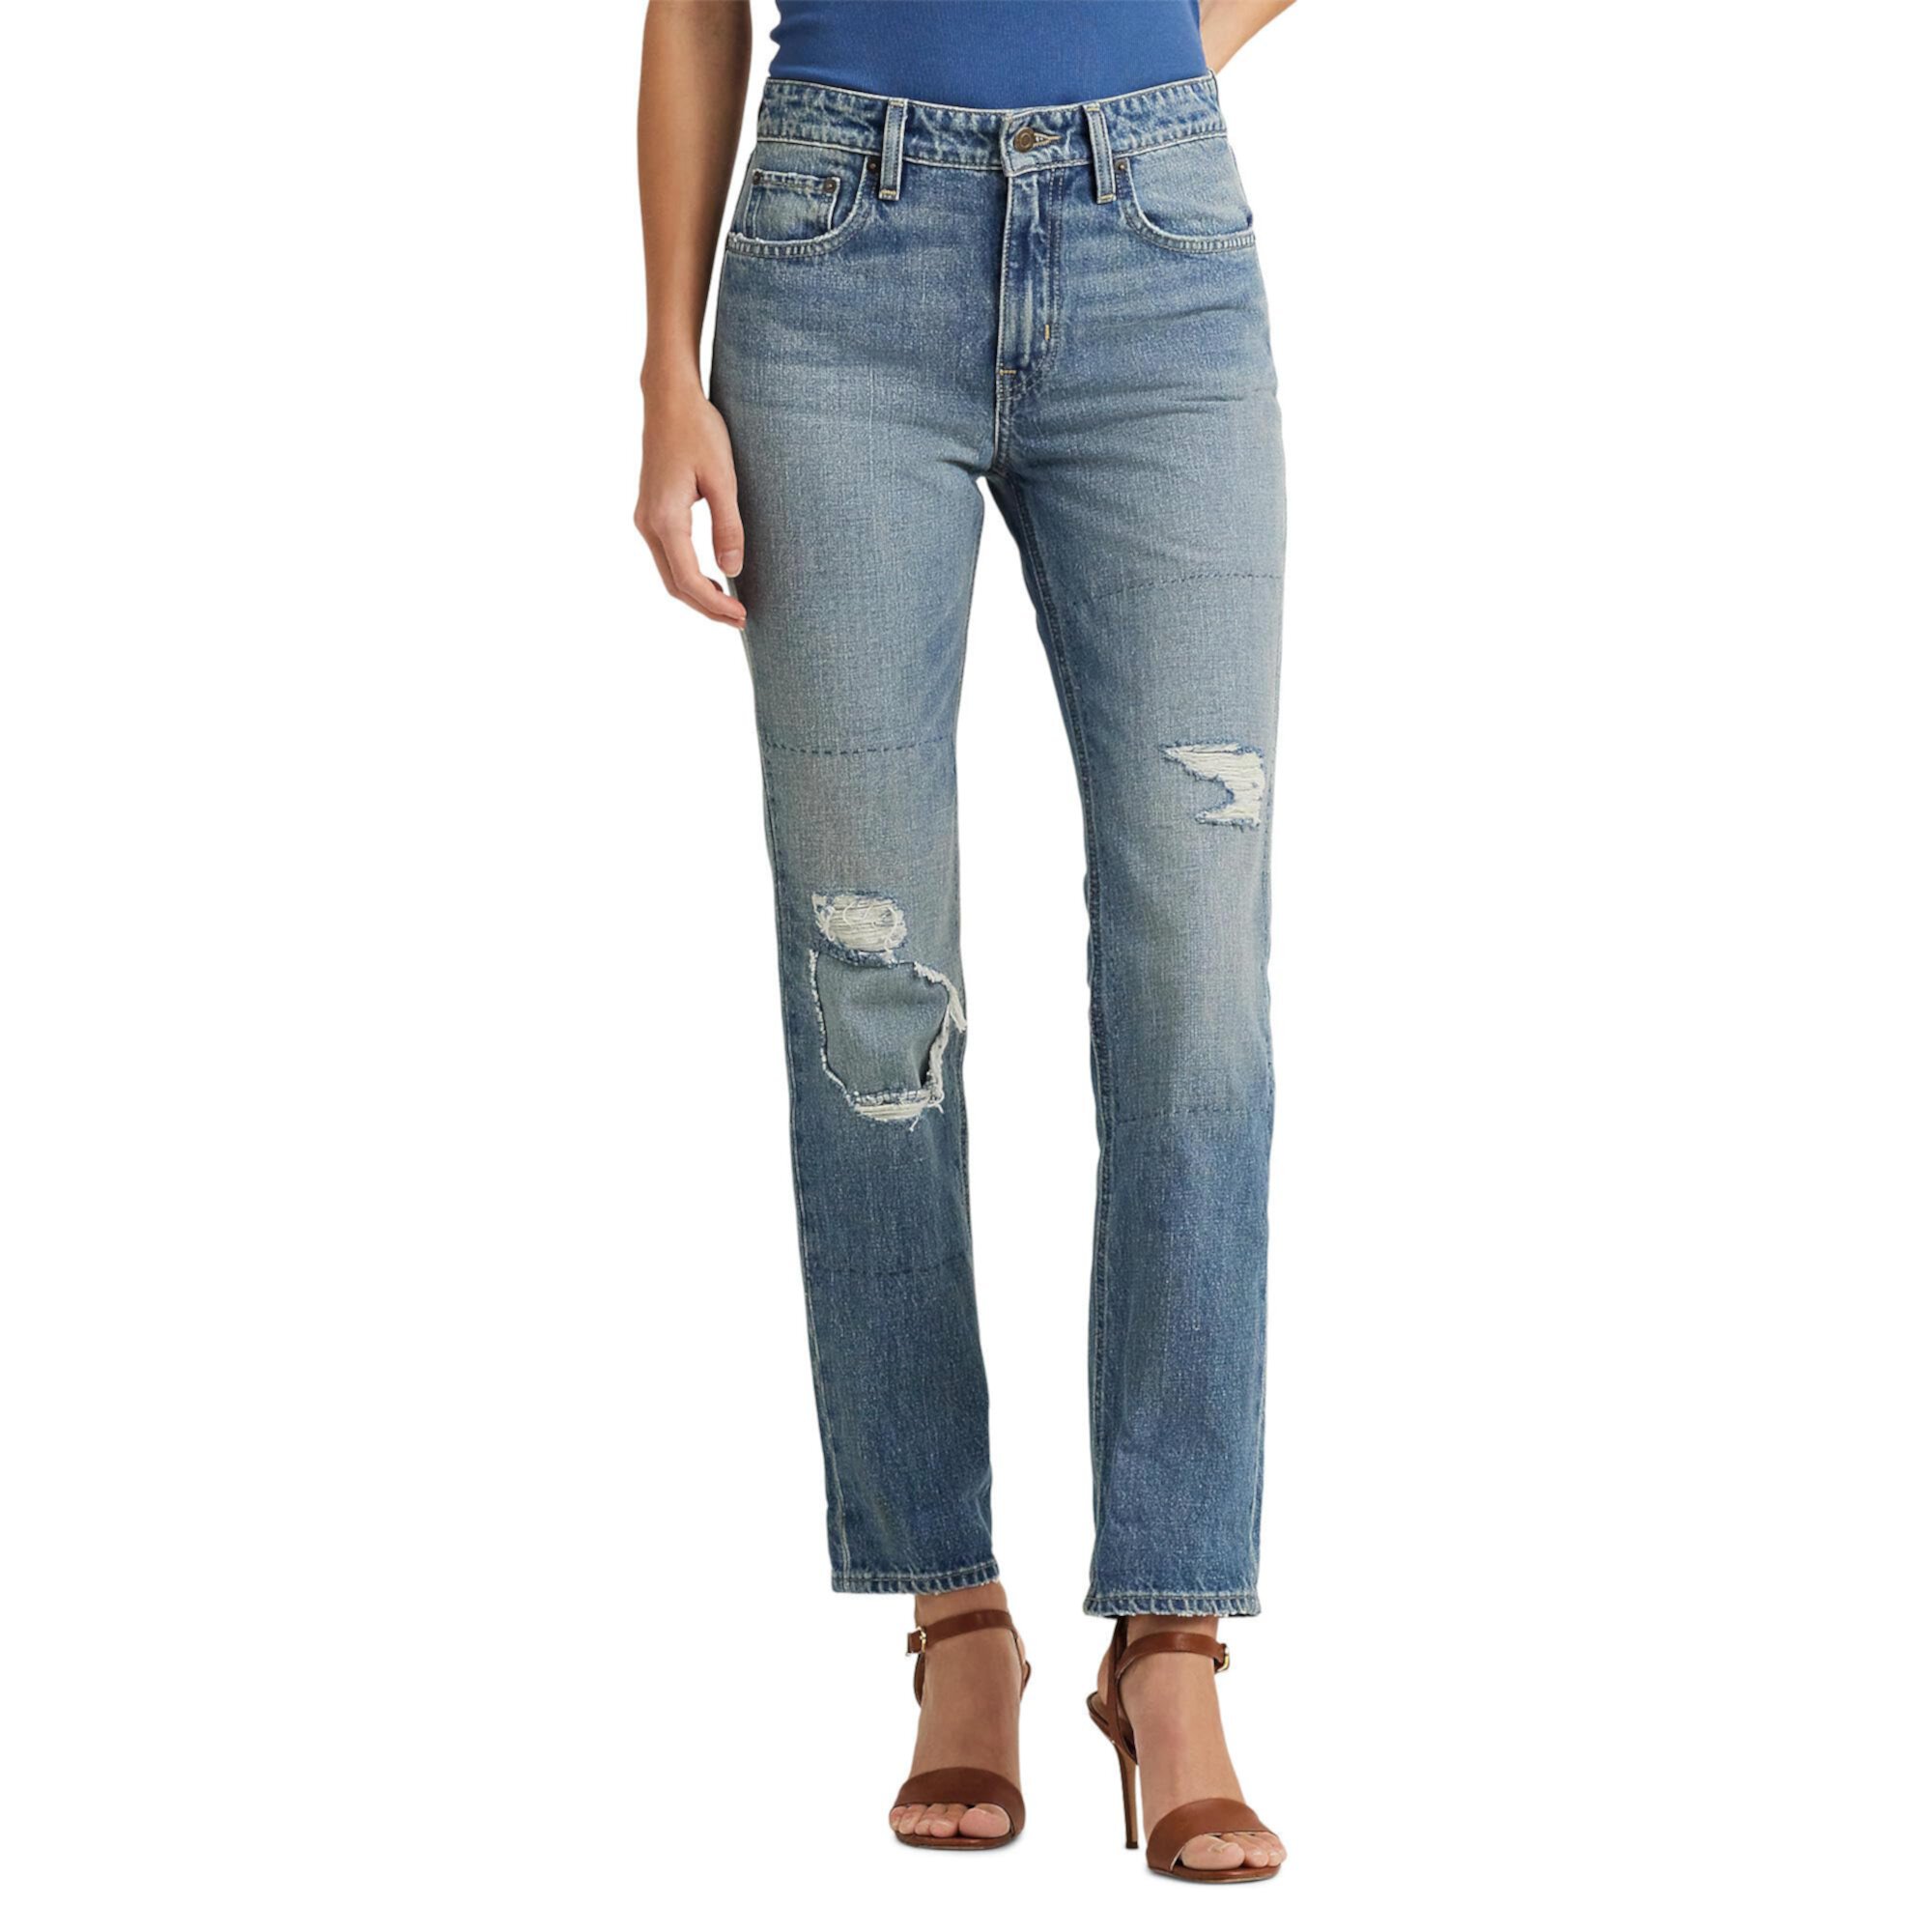 Distressed High-Rise Straight Ankle Jeans in Cassis Wash LAUREN Ralph Lauren